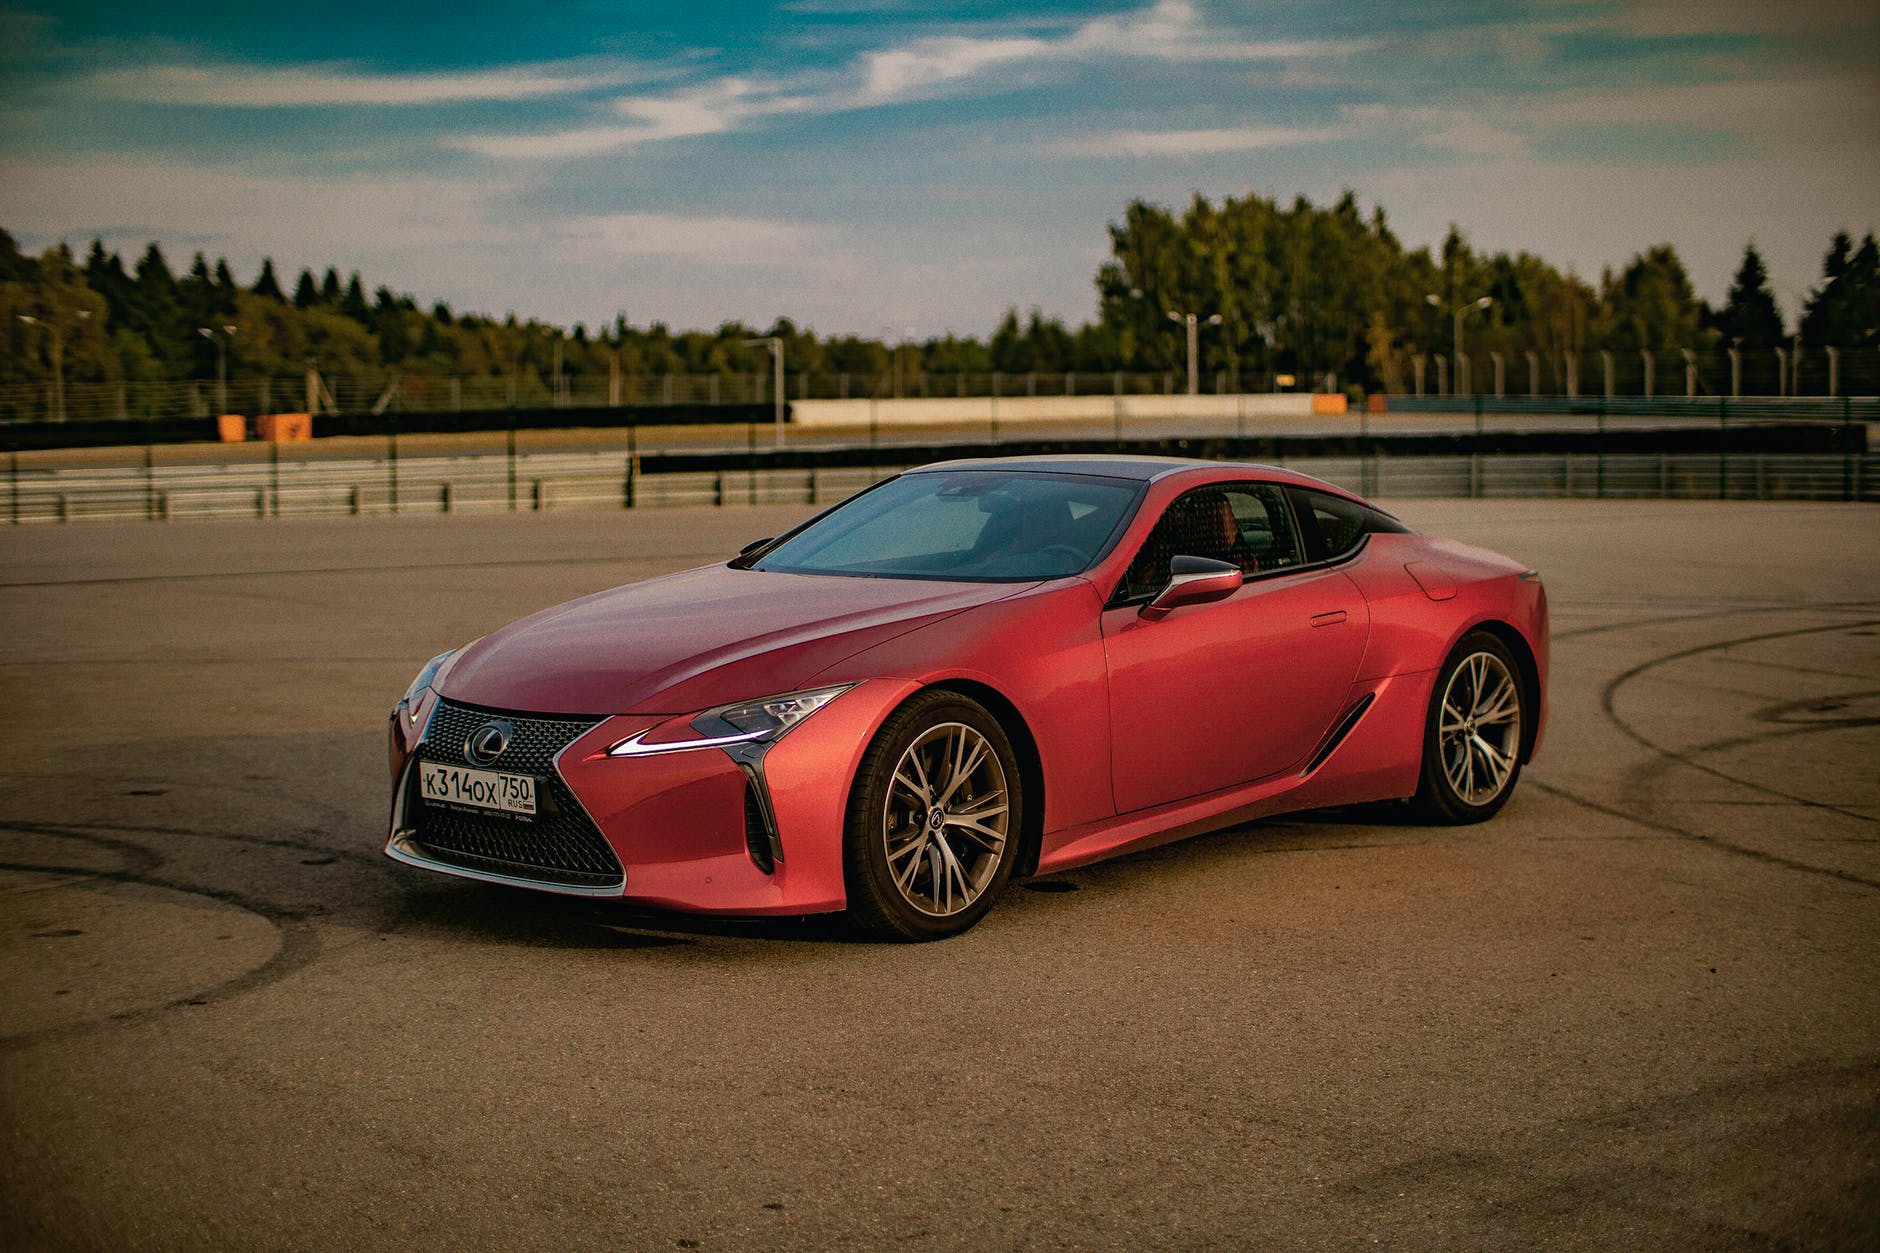 photo of red Lexus sports car